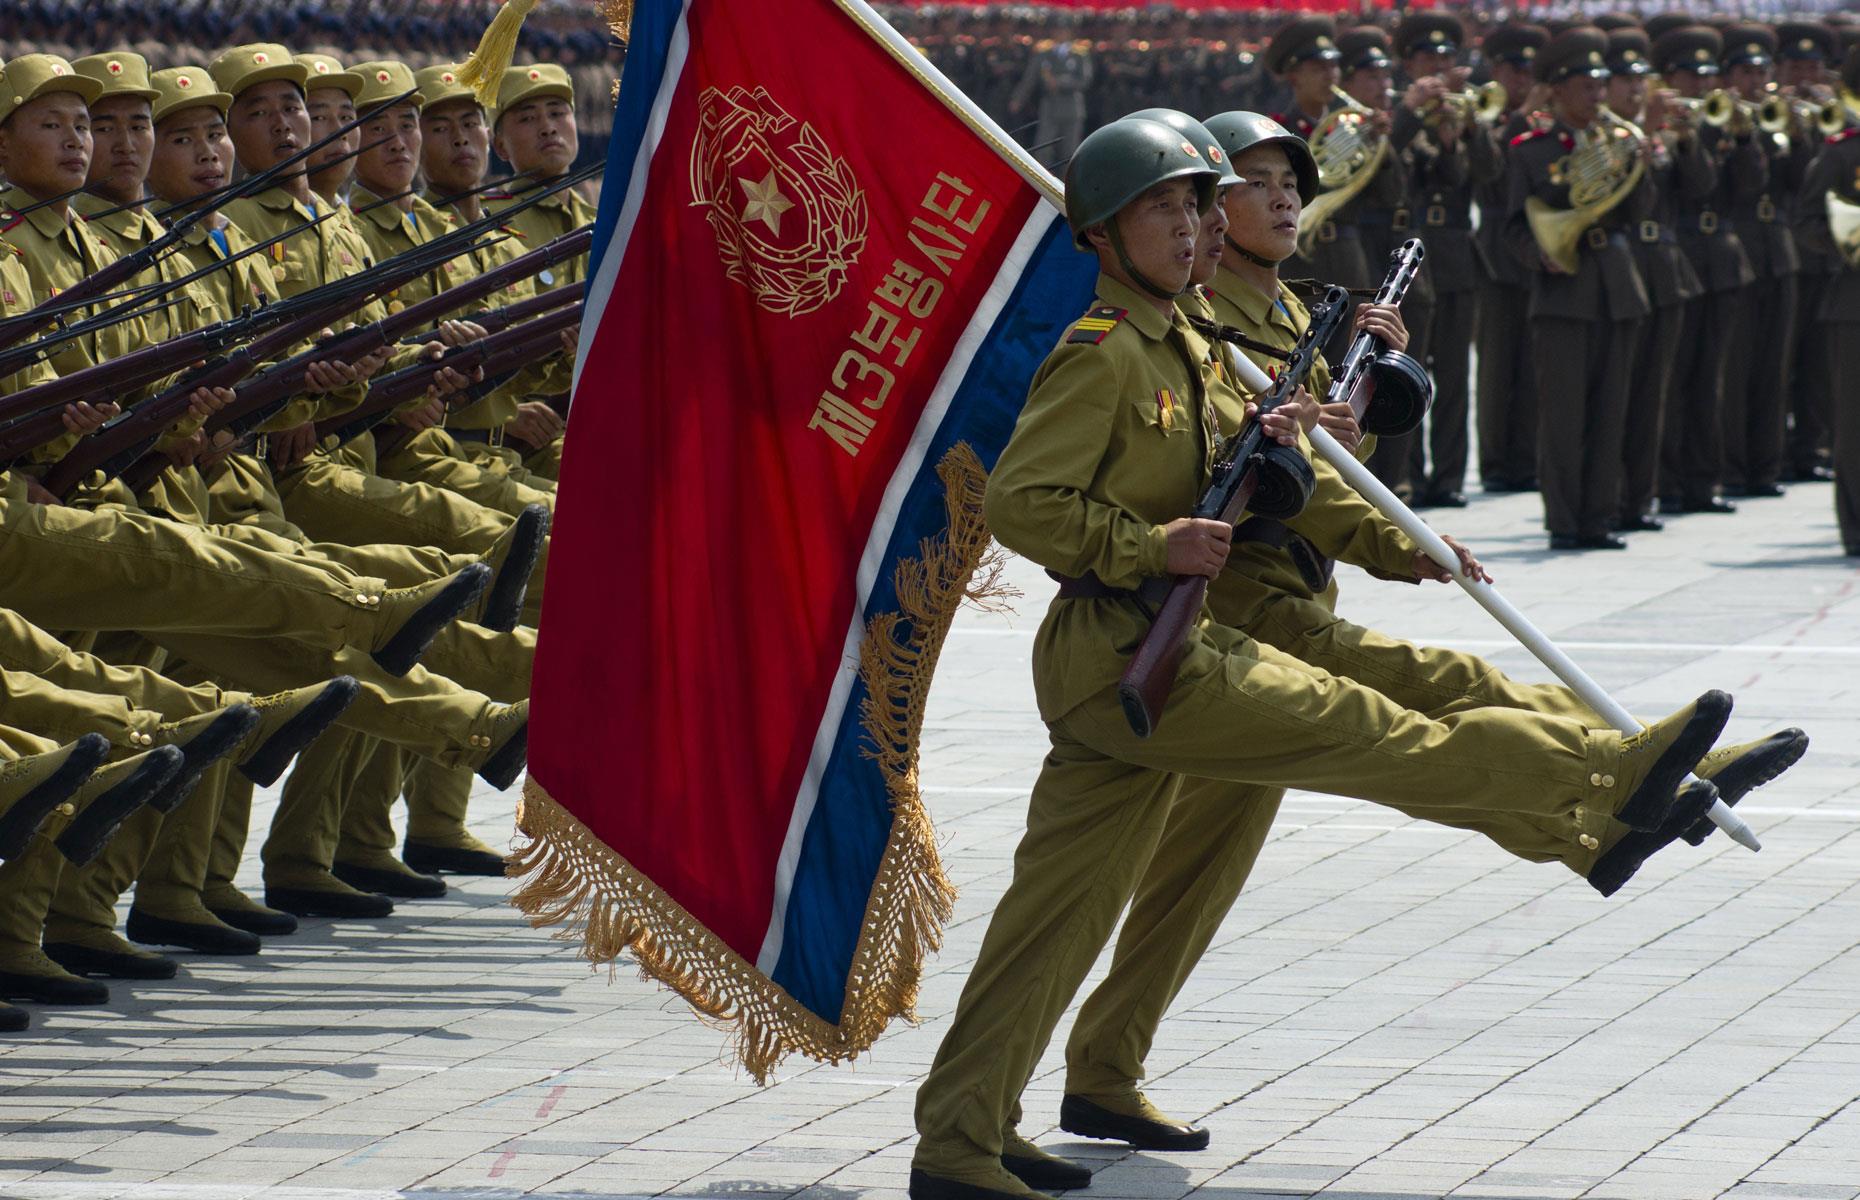 Defence spending represents 22% of North Korea's GDP